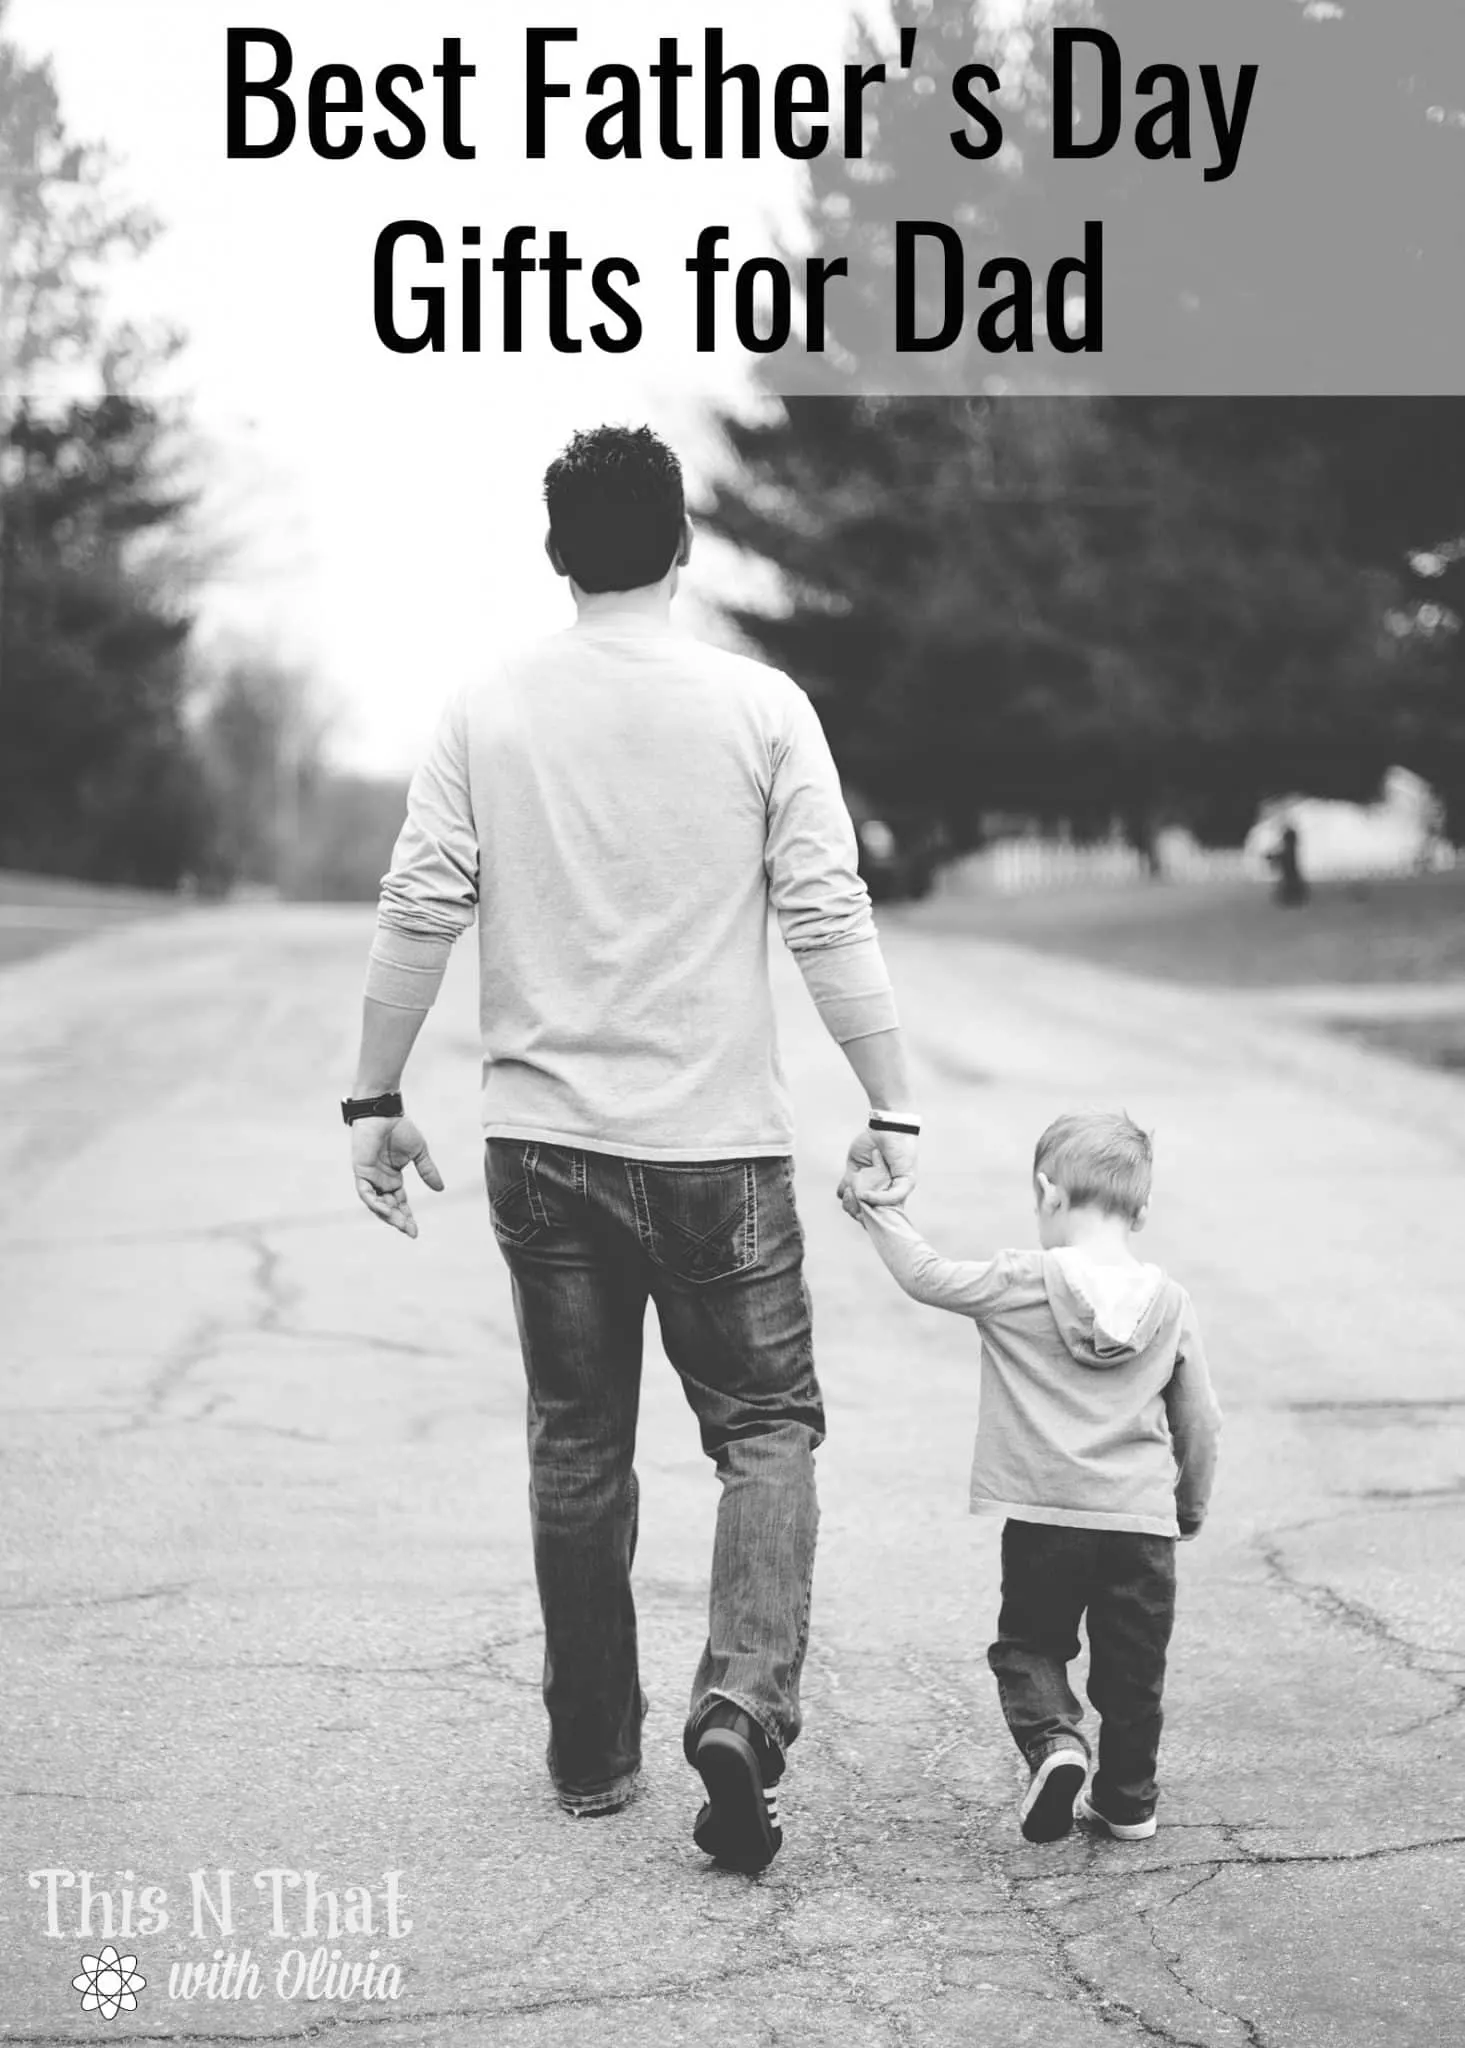 Gift Ideas for Dad - 25 Fun Christmas Gift Ideas for Dad he will love!